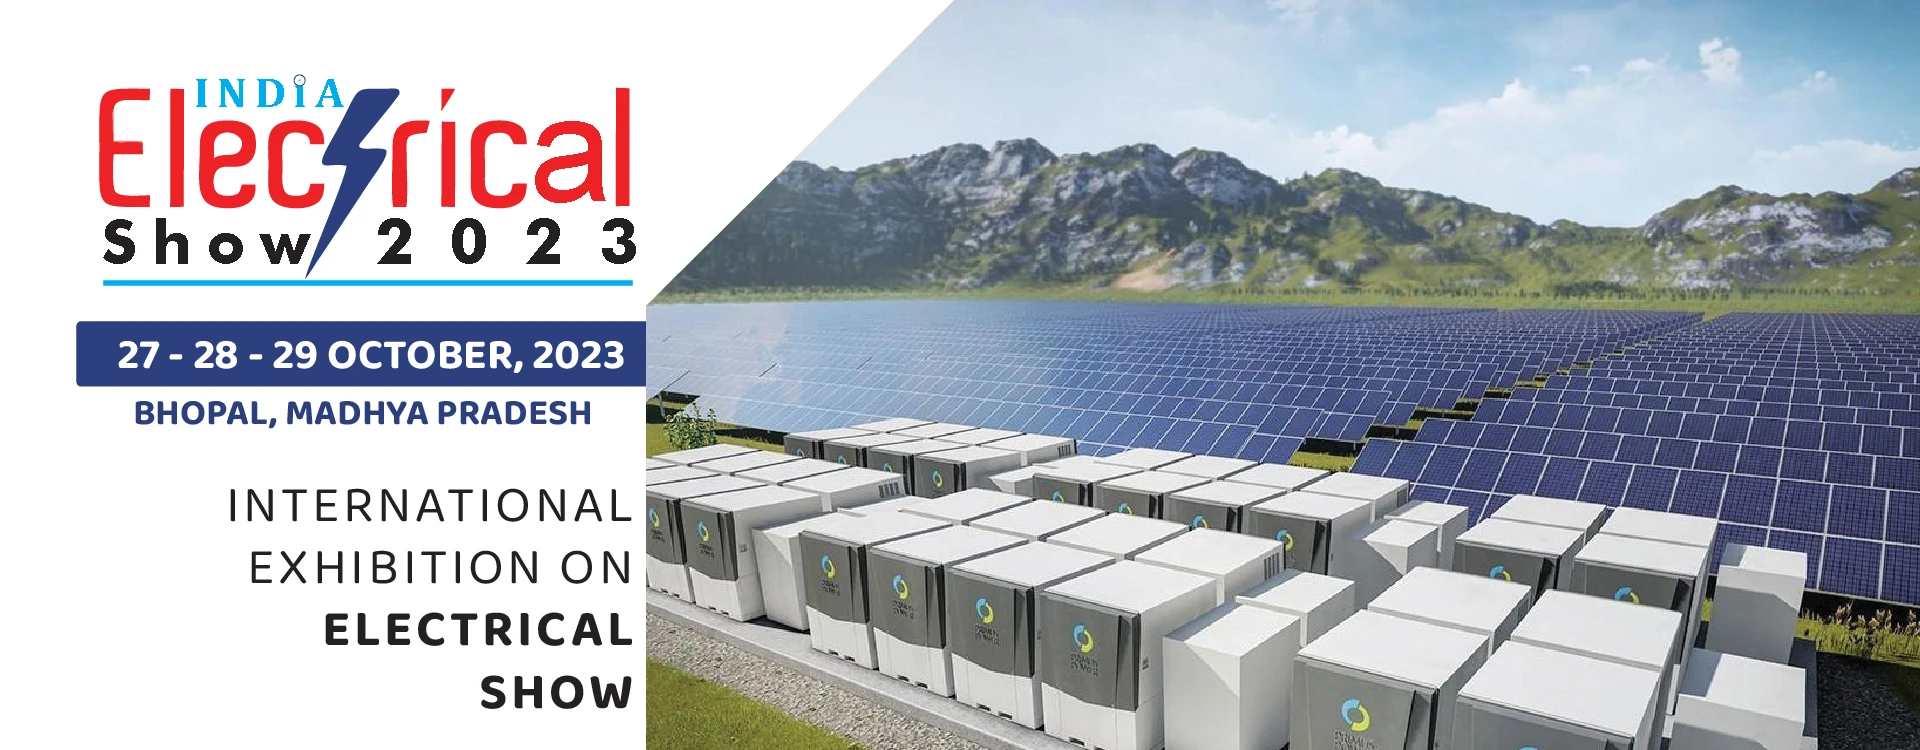 India Electrical show 2023